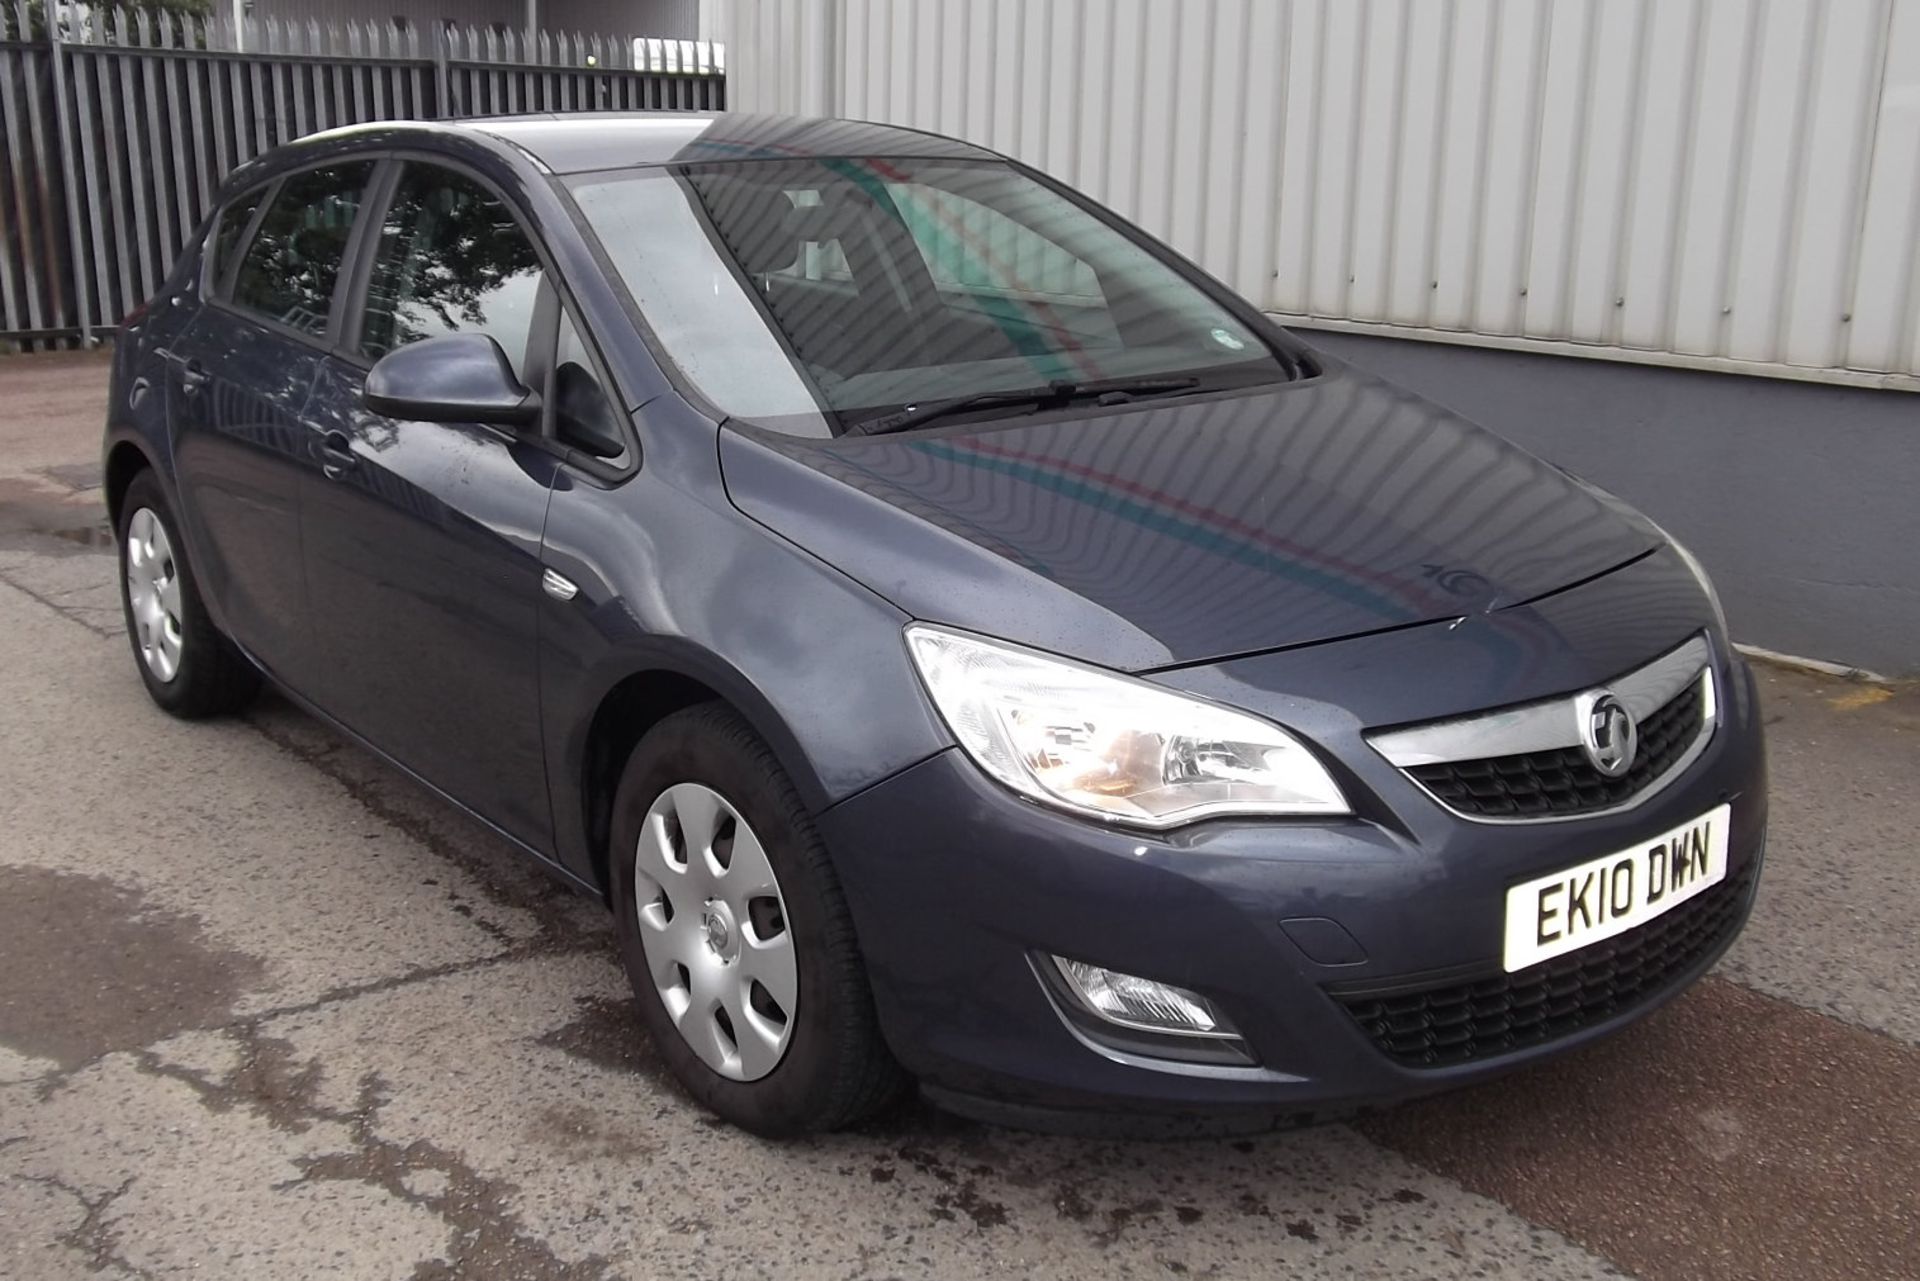 2010 Vauxhall Astra 1.6 Exclusive 5 Door Hatchback - CL505 - NO VAT ON THE HAMMER - Location: Corby, - Image 3 of 9